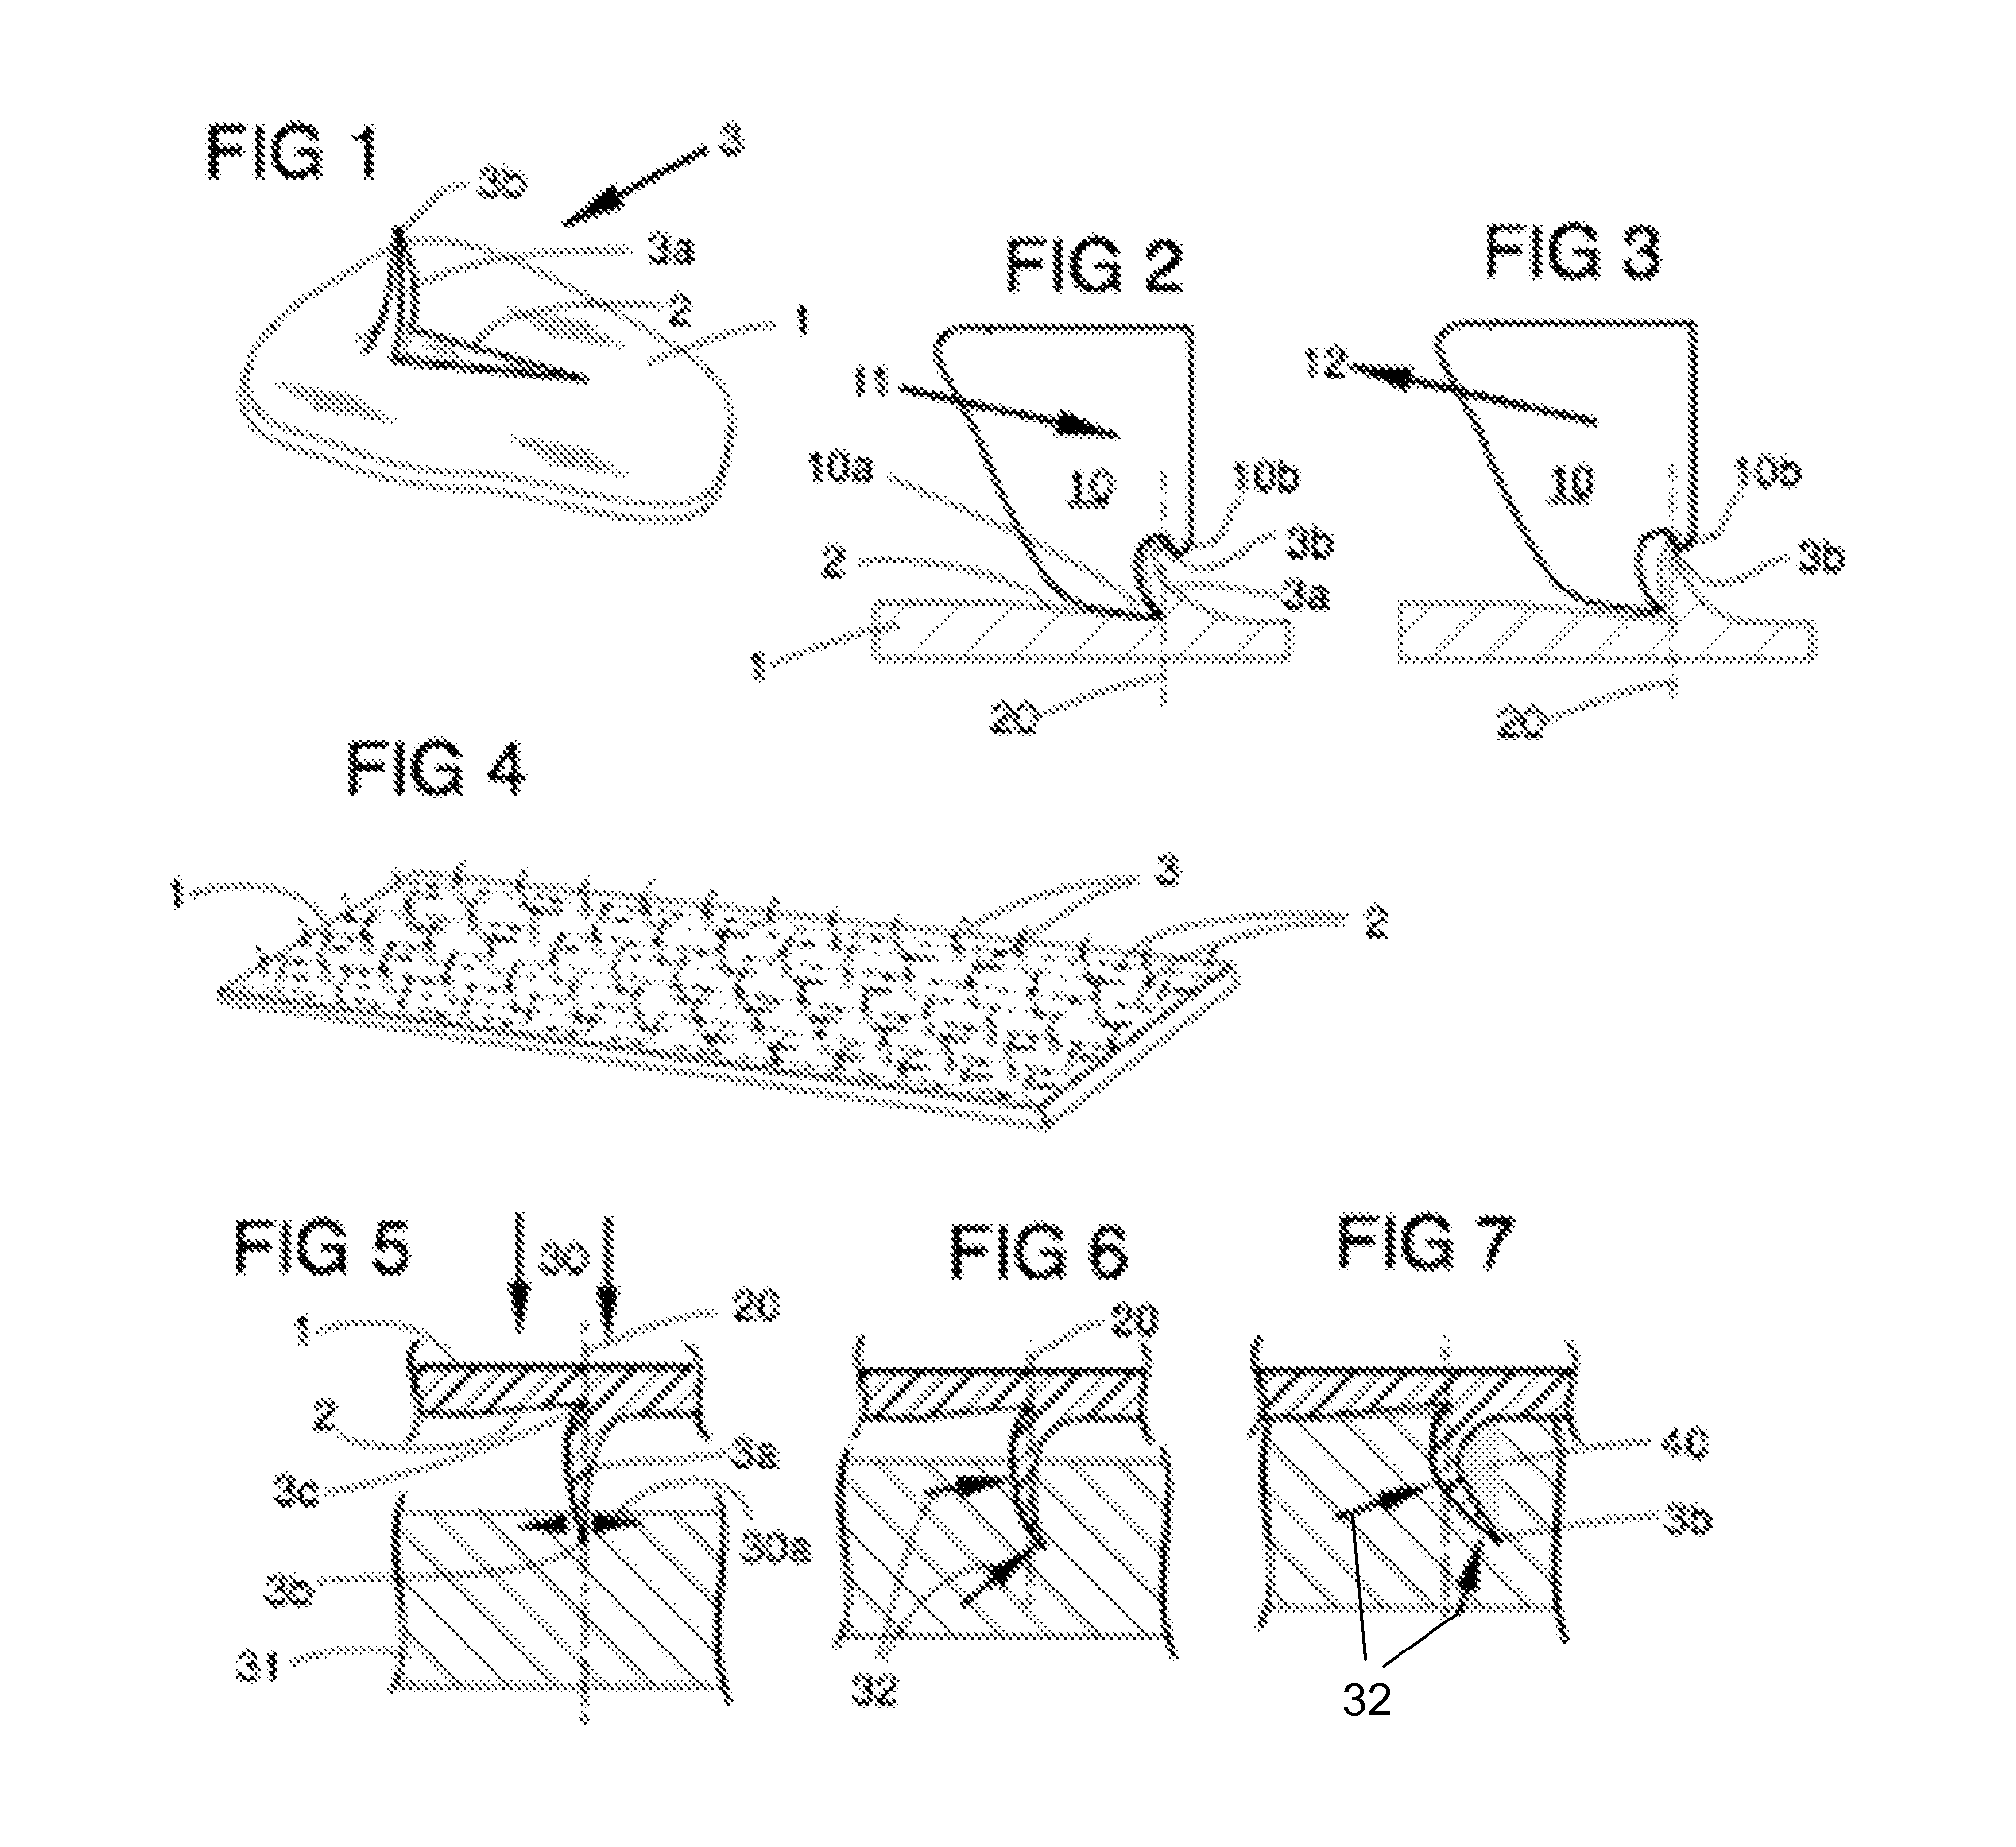 Material with self-locking barbs